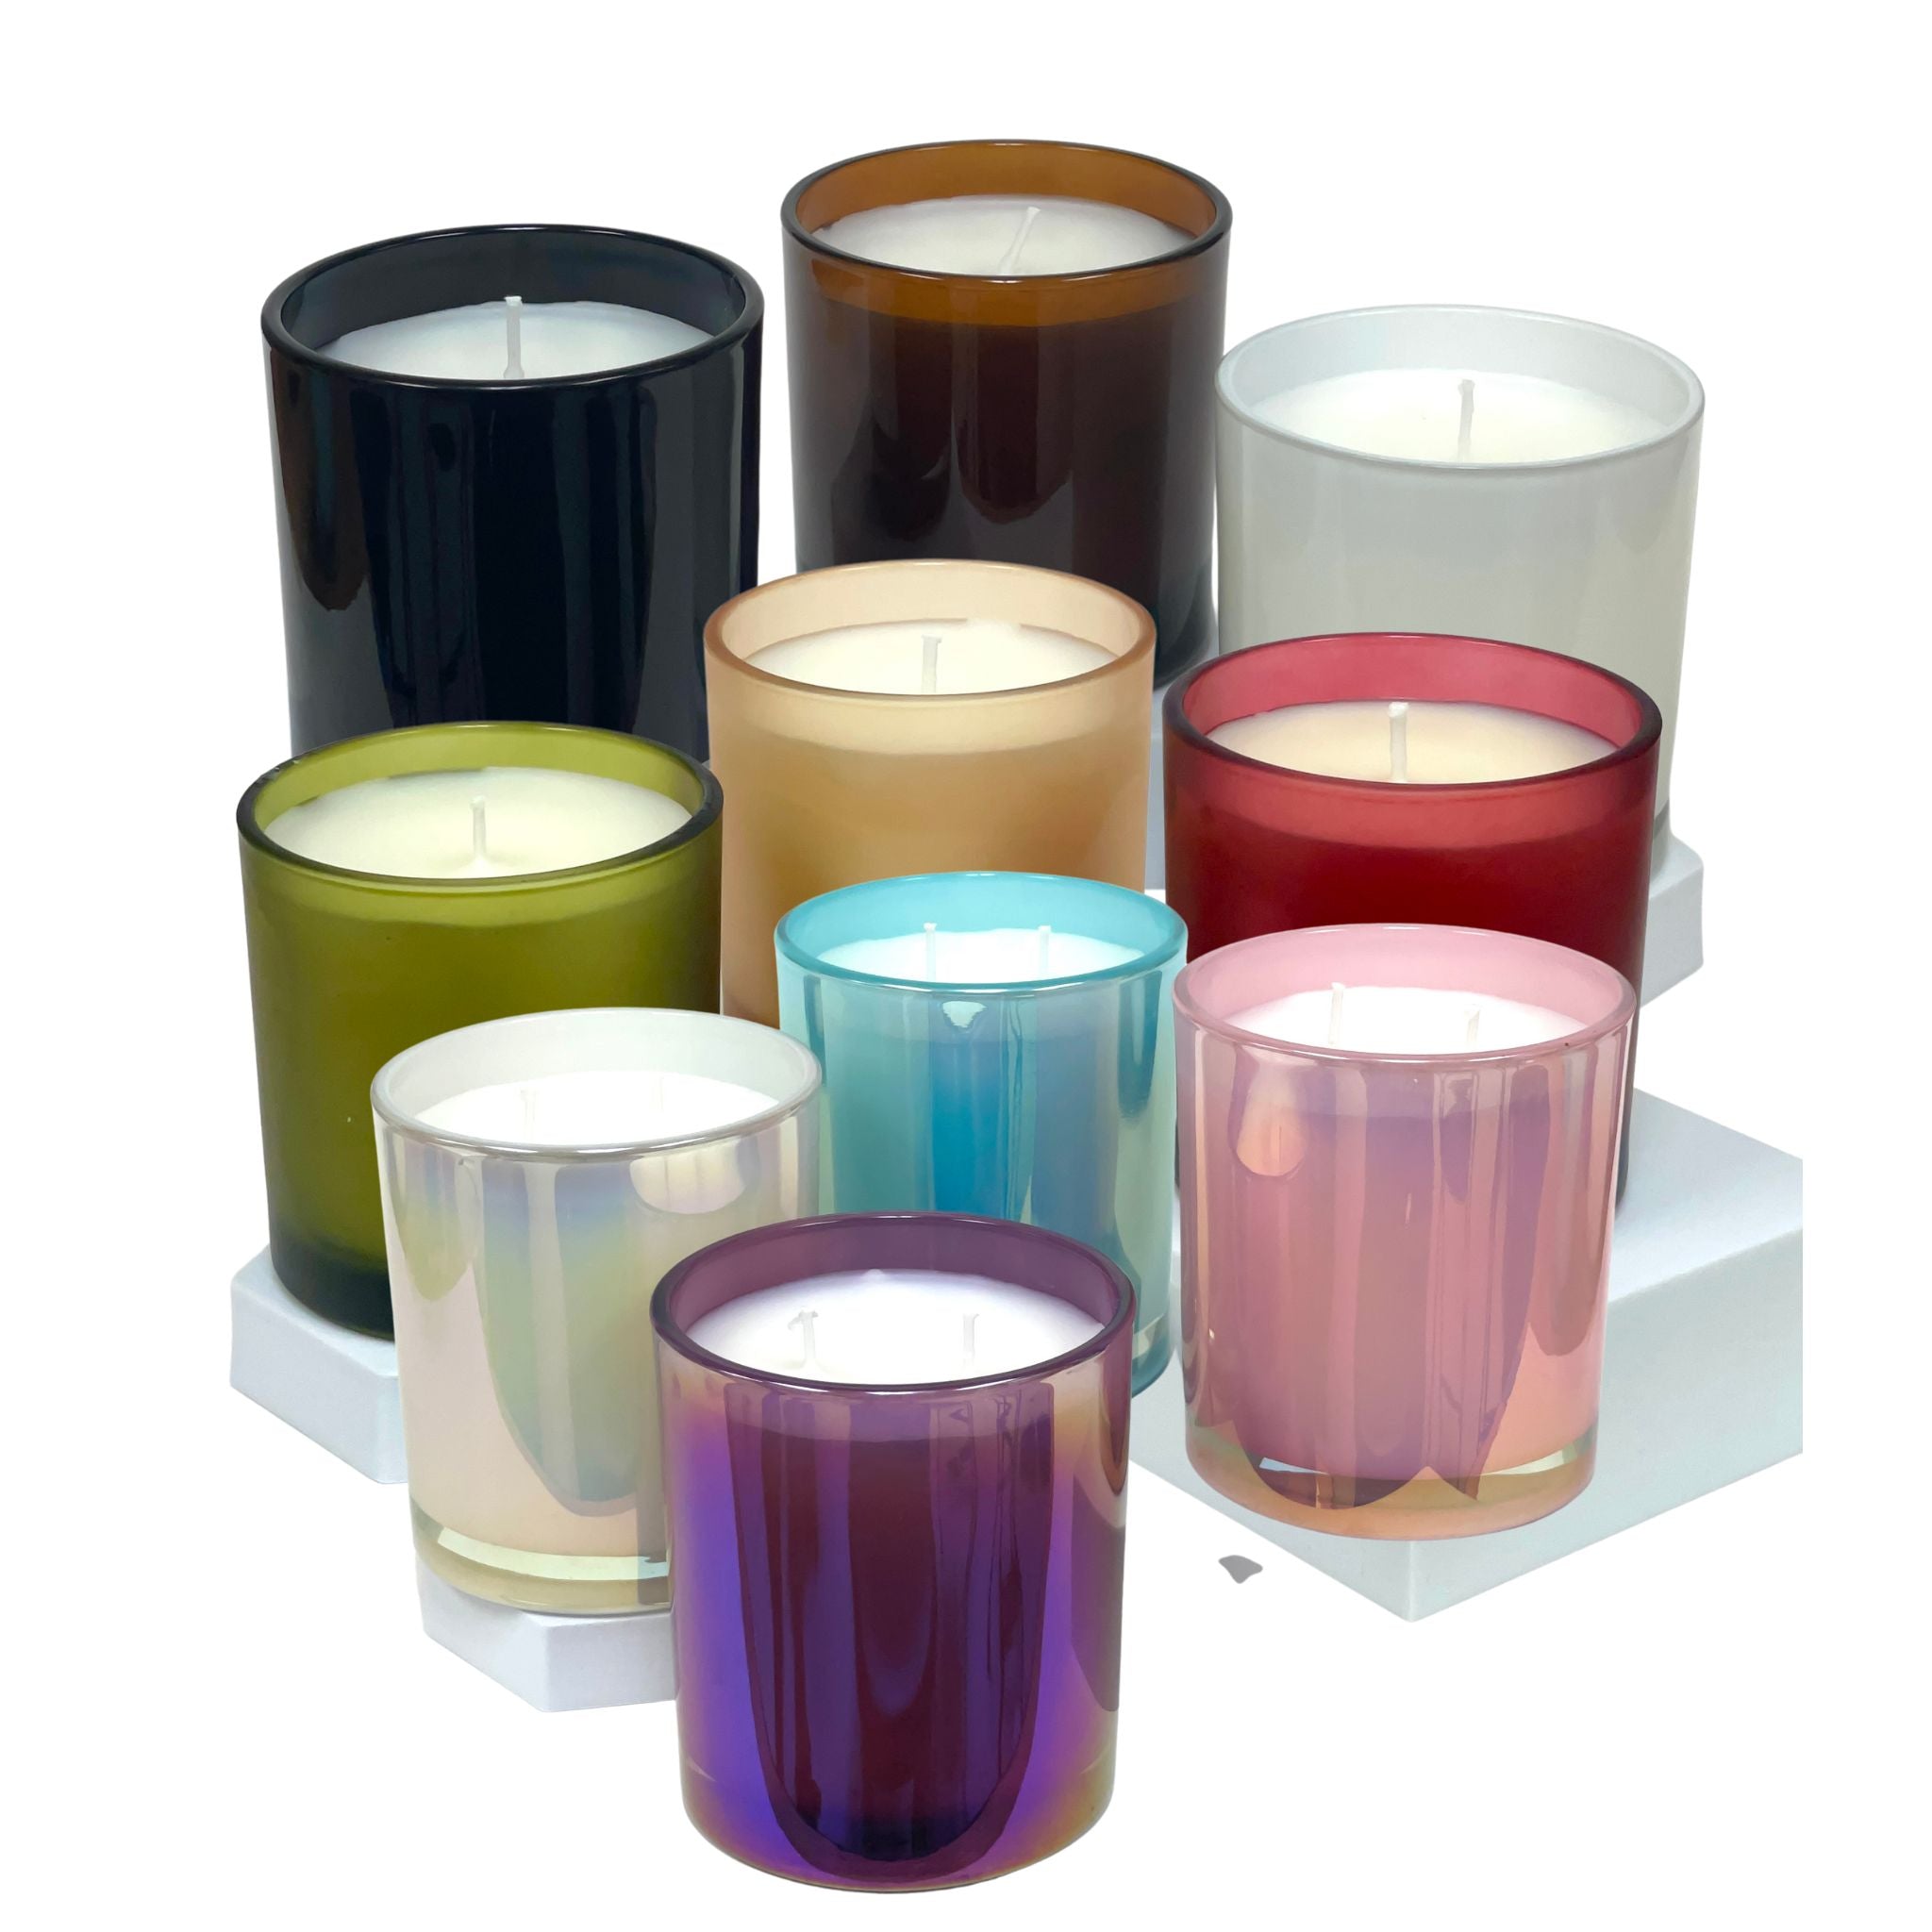 Build Your Brand with Private Label Candles